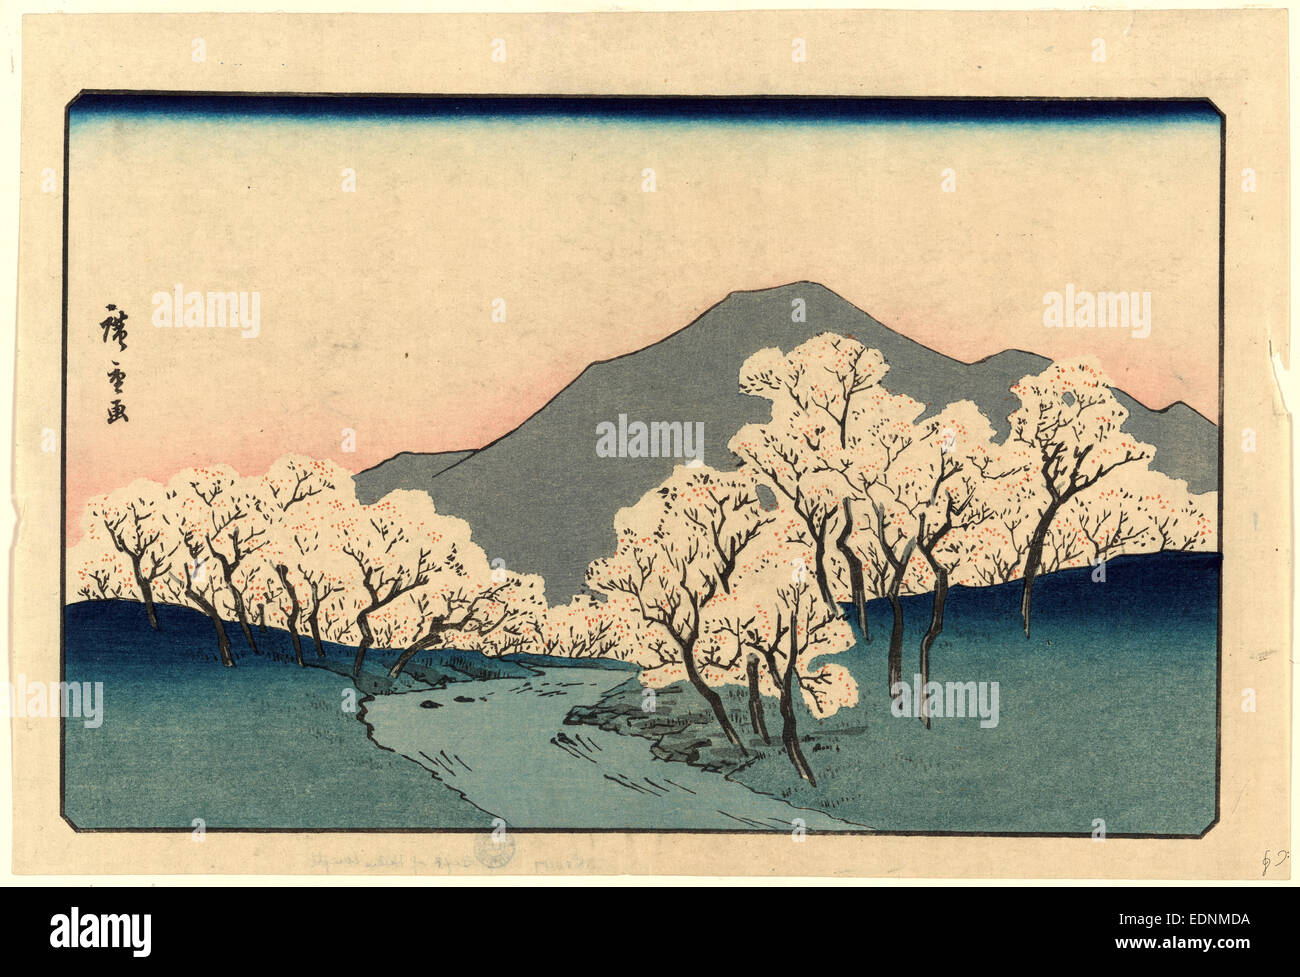 Sakura namiki zu, A Grove of Cherry Trees., Ando, Hiroshige, 1797-1858, artist, [between 1820 and 1858, printed later], 1 print : woodcut, color ; 25.5 x 37.7 cm., Print shows a grove of blossoming cherry trees with mountain in the background. Stock Photo